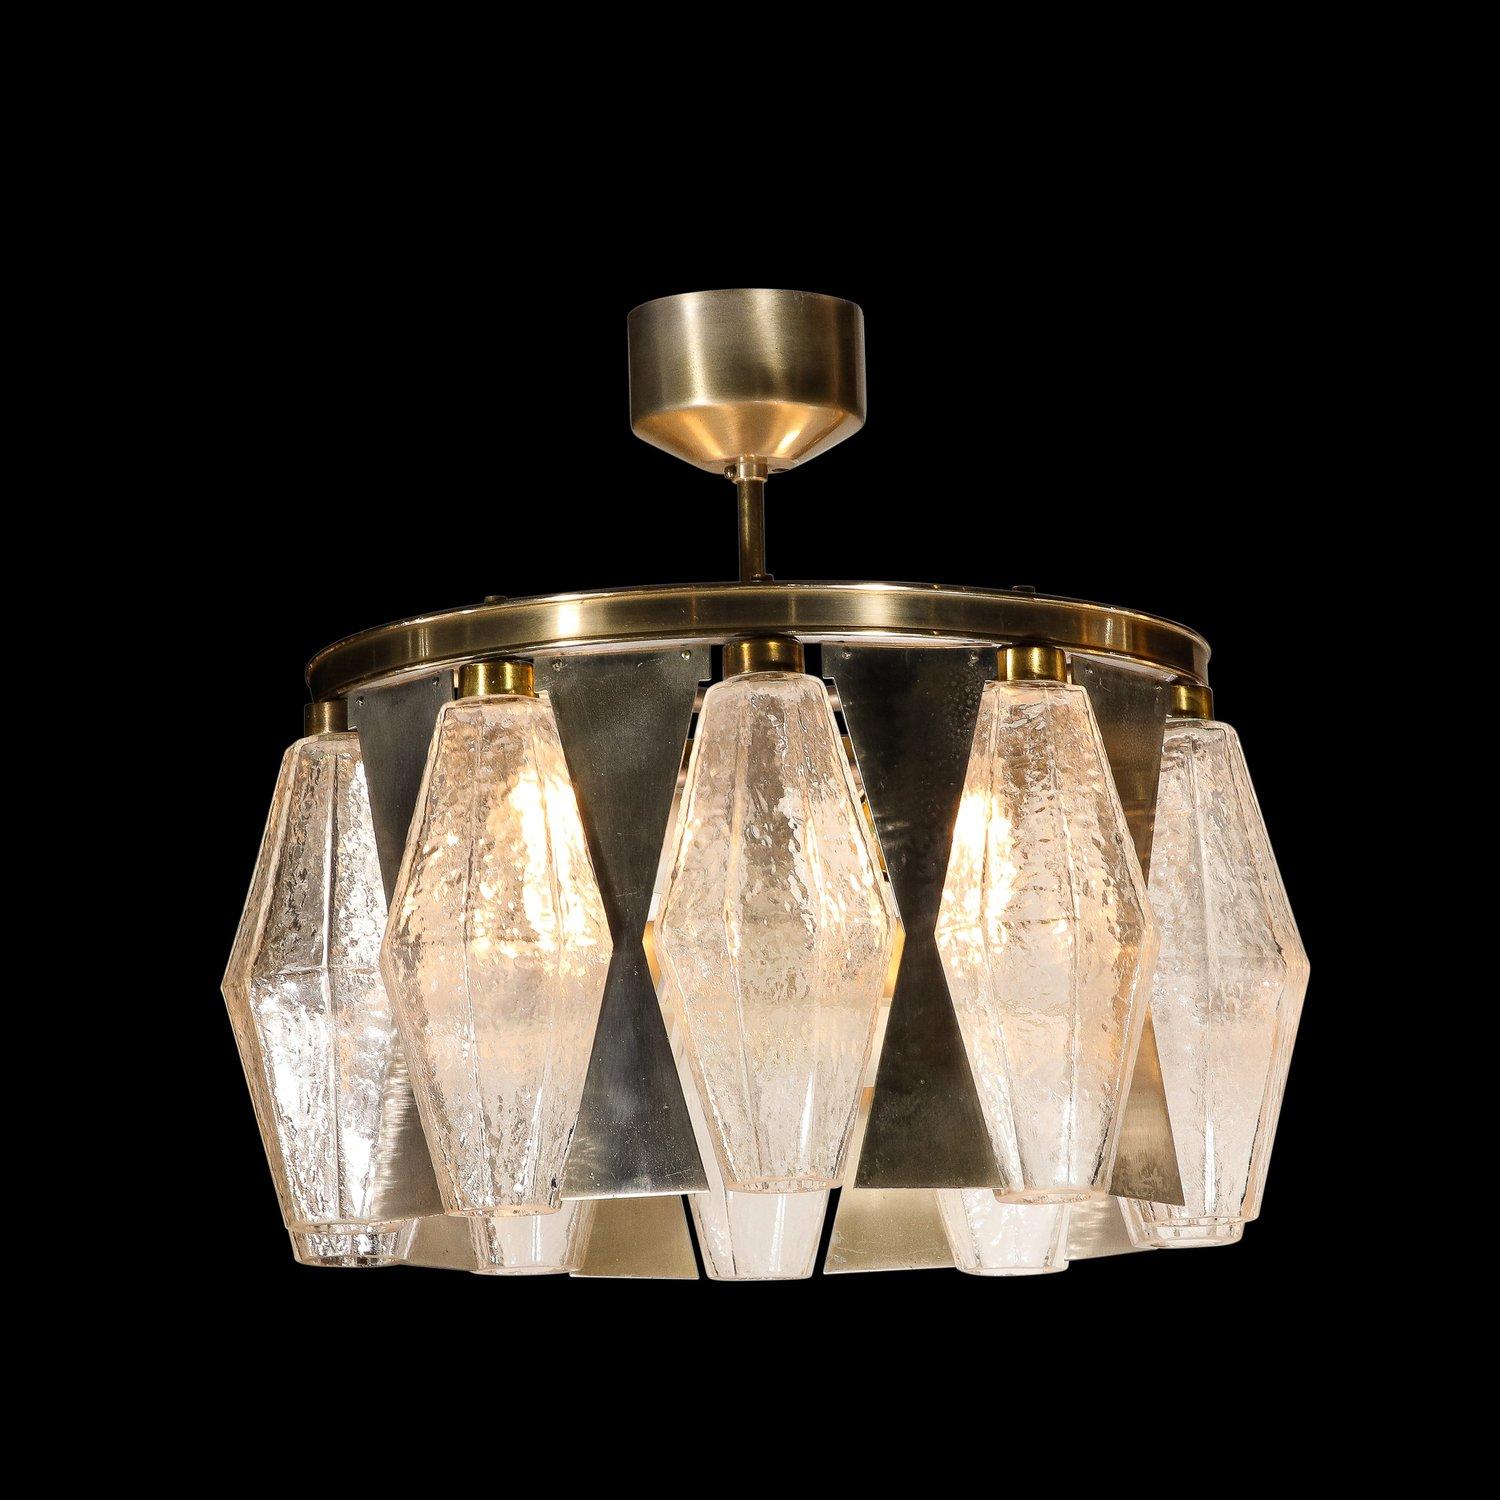 This stunning Mid-Century Modern chandelier was realized by the esteemed atelier of Venini in Murano, Italy- the island off the coast of Venice renowned for centuries for its superlative glass production- circa 1970. It features translucent